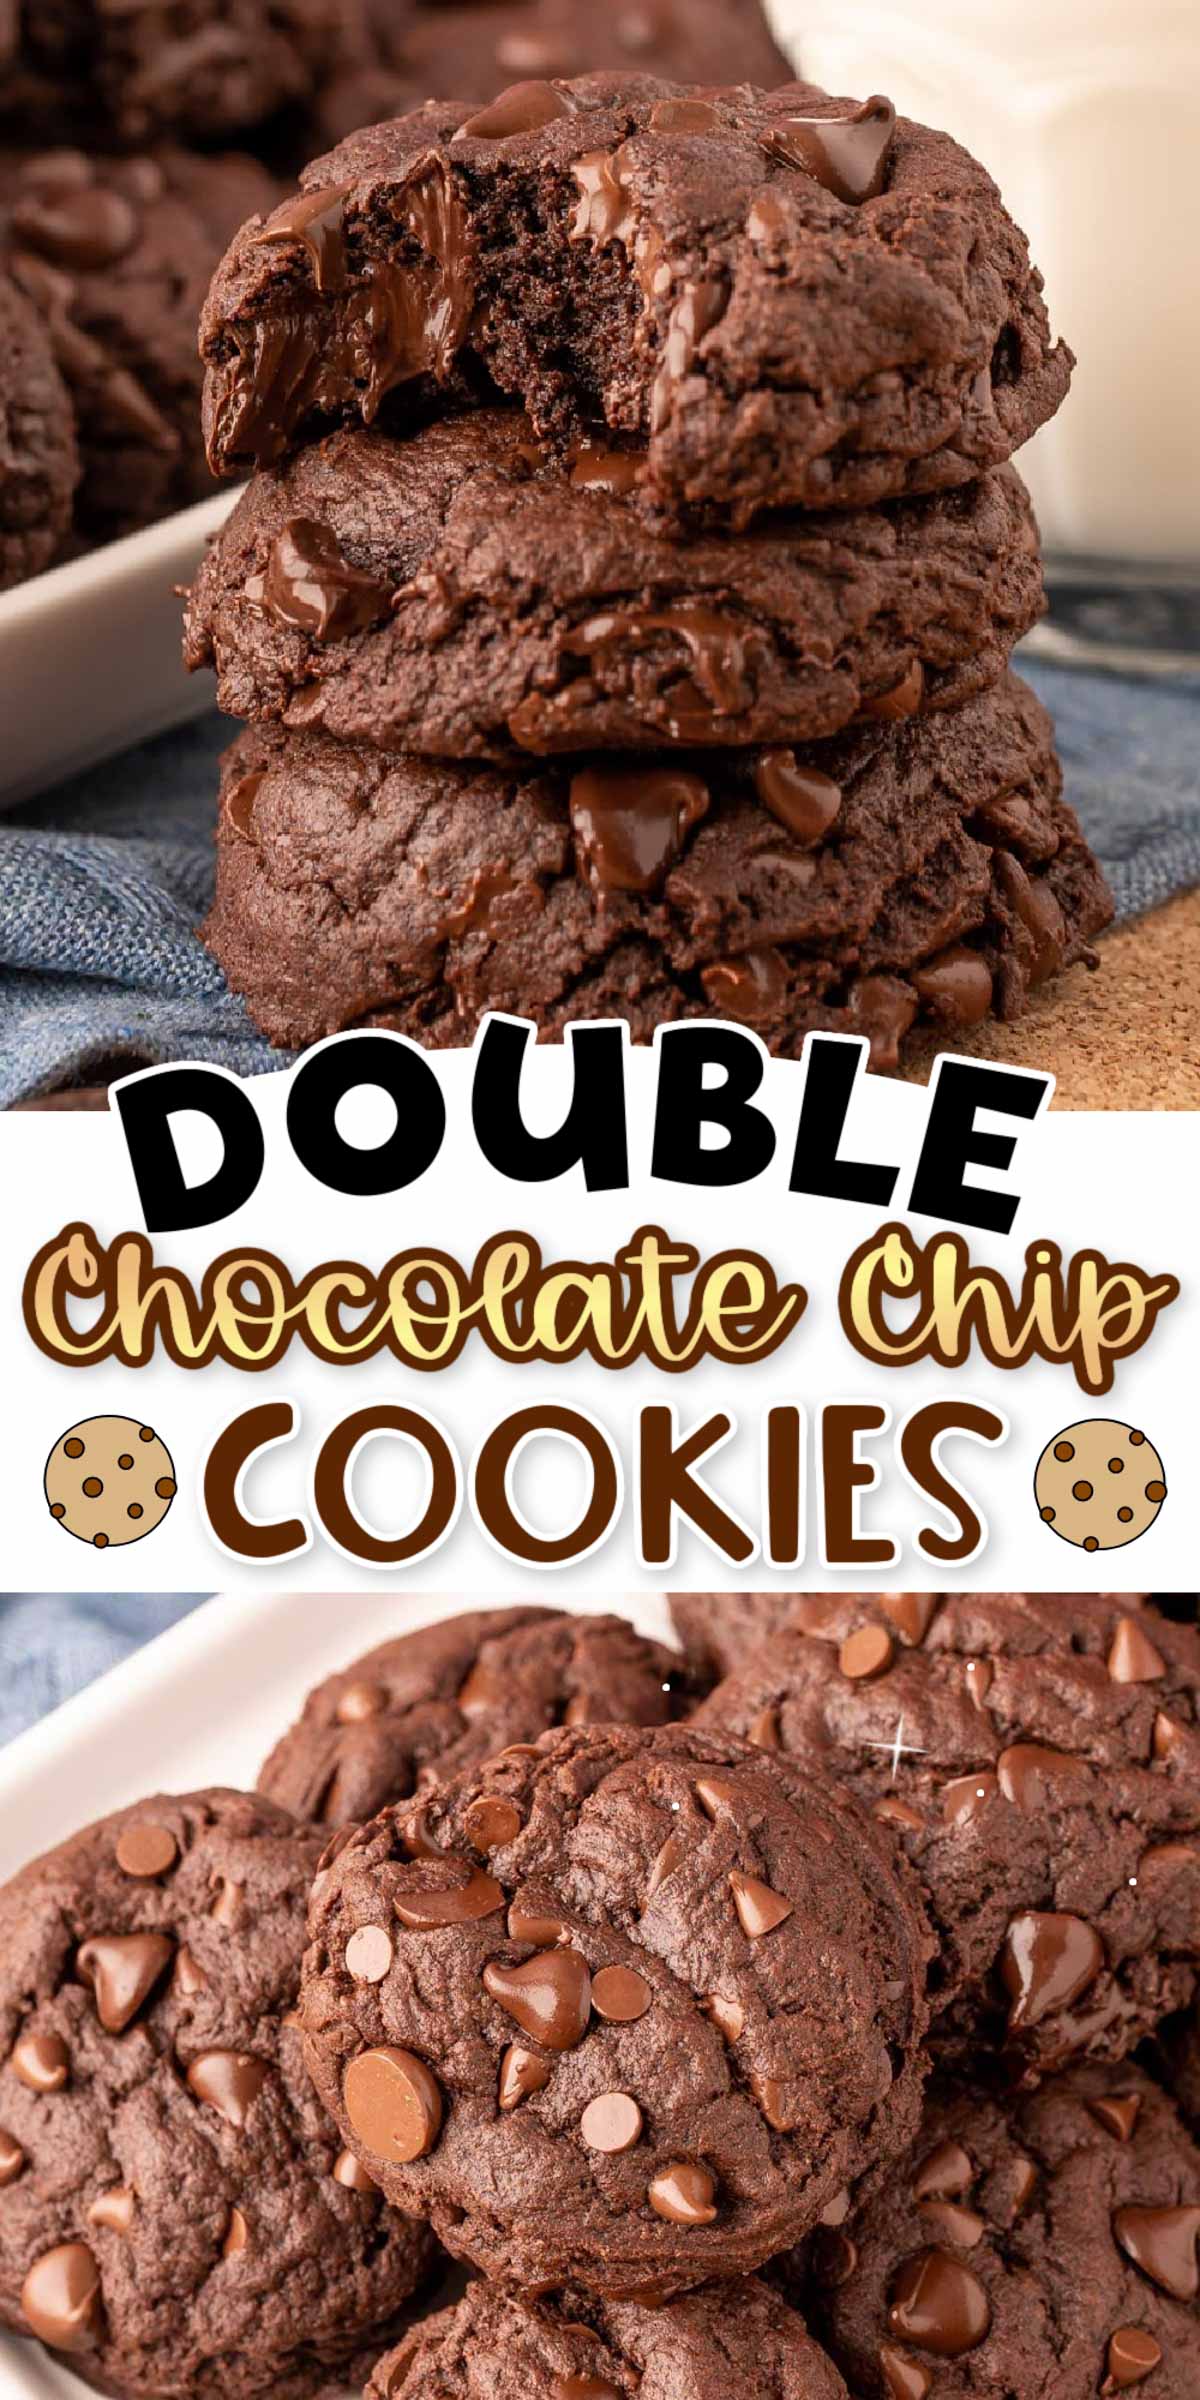 These Double Chocolate Chip Cookies have a slightly crisp outer shell and are dense, fudgy, and gooey on the inside, almost like a brownie. Pull the first batch out of the oven in less than 30 minutes! via @sugarandsoulco